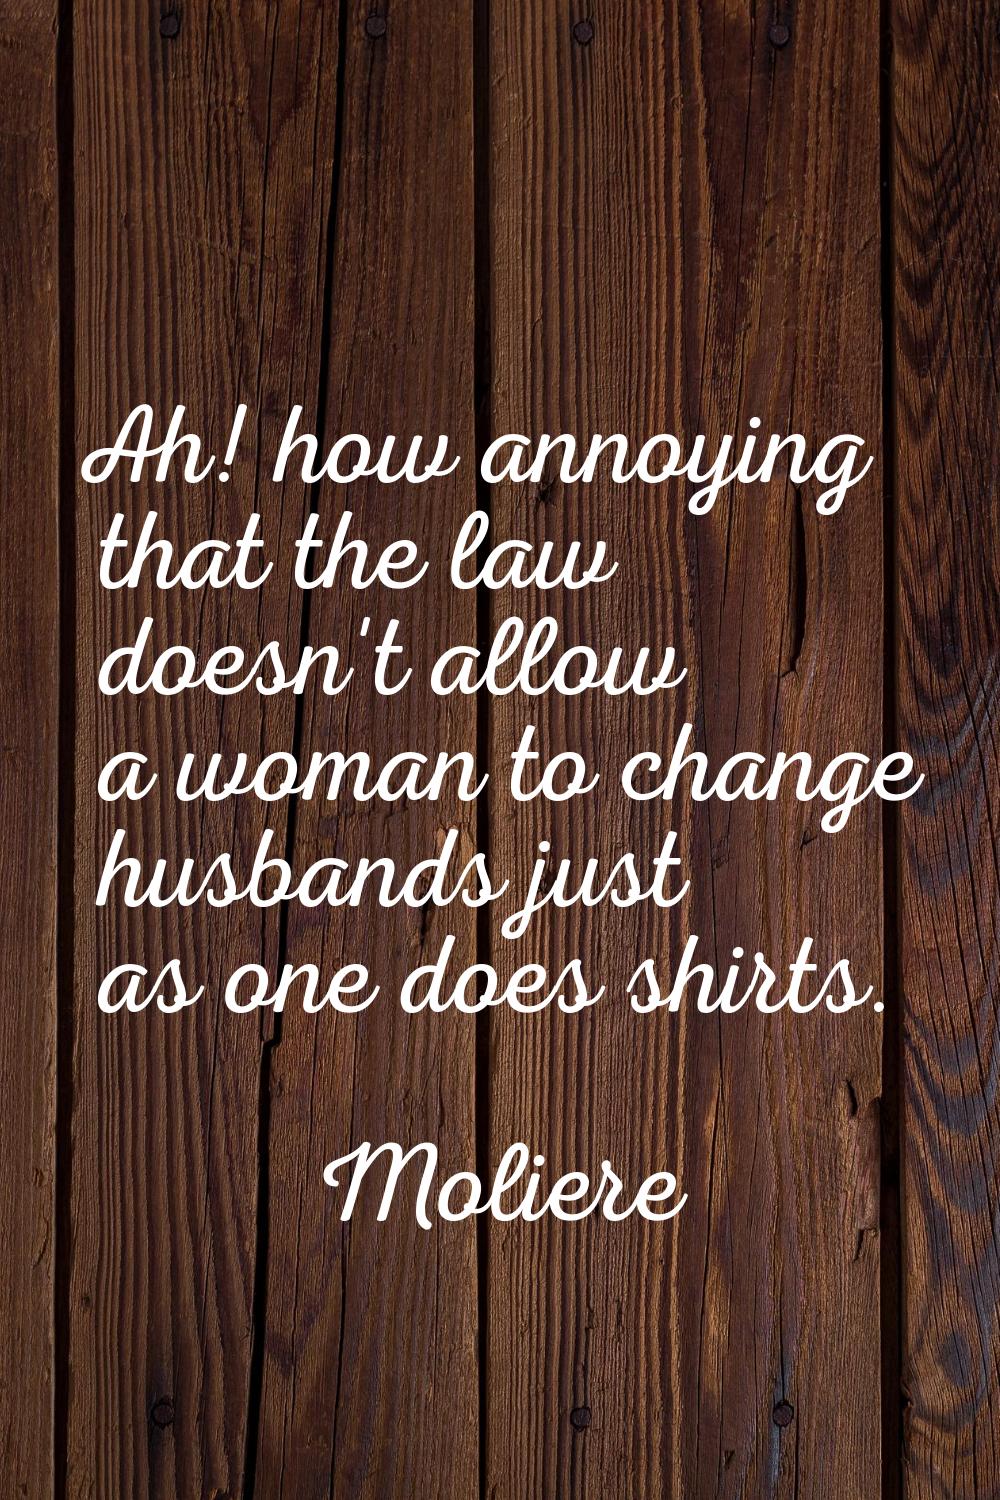 Ah! how annoying that the law doesn't allow a woman to change husbands just as one does shirts.